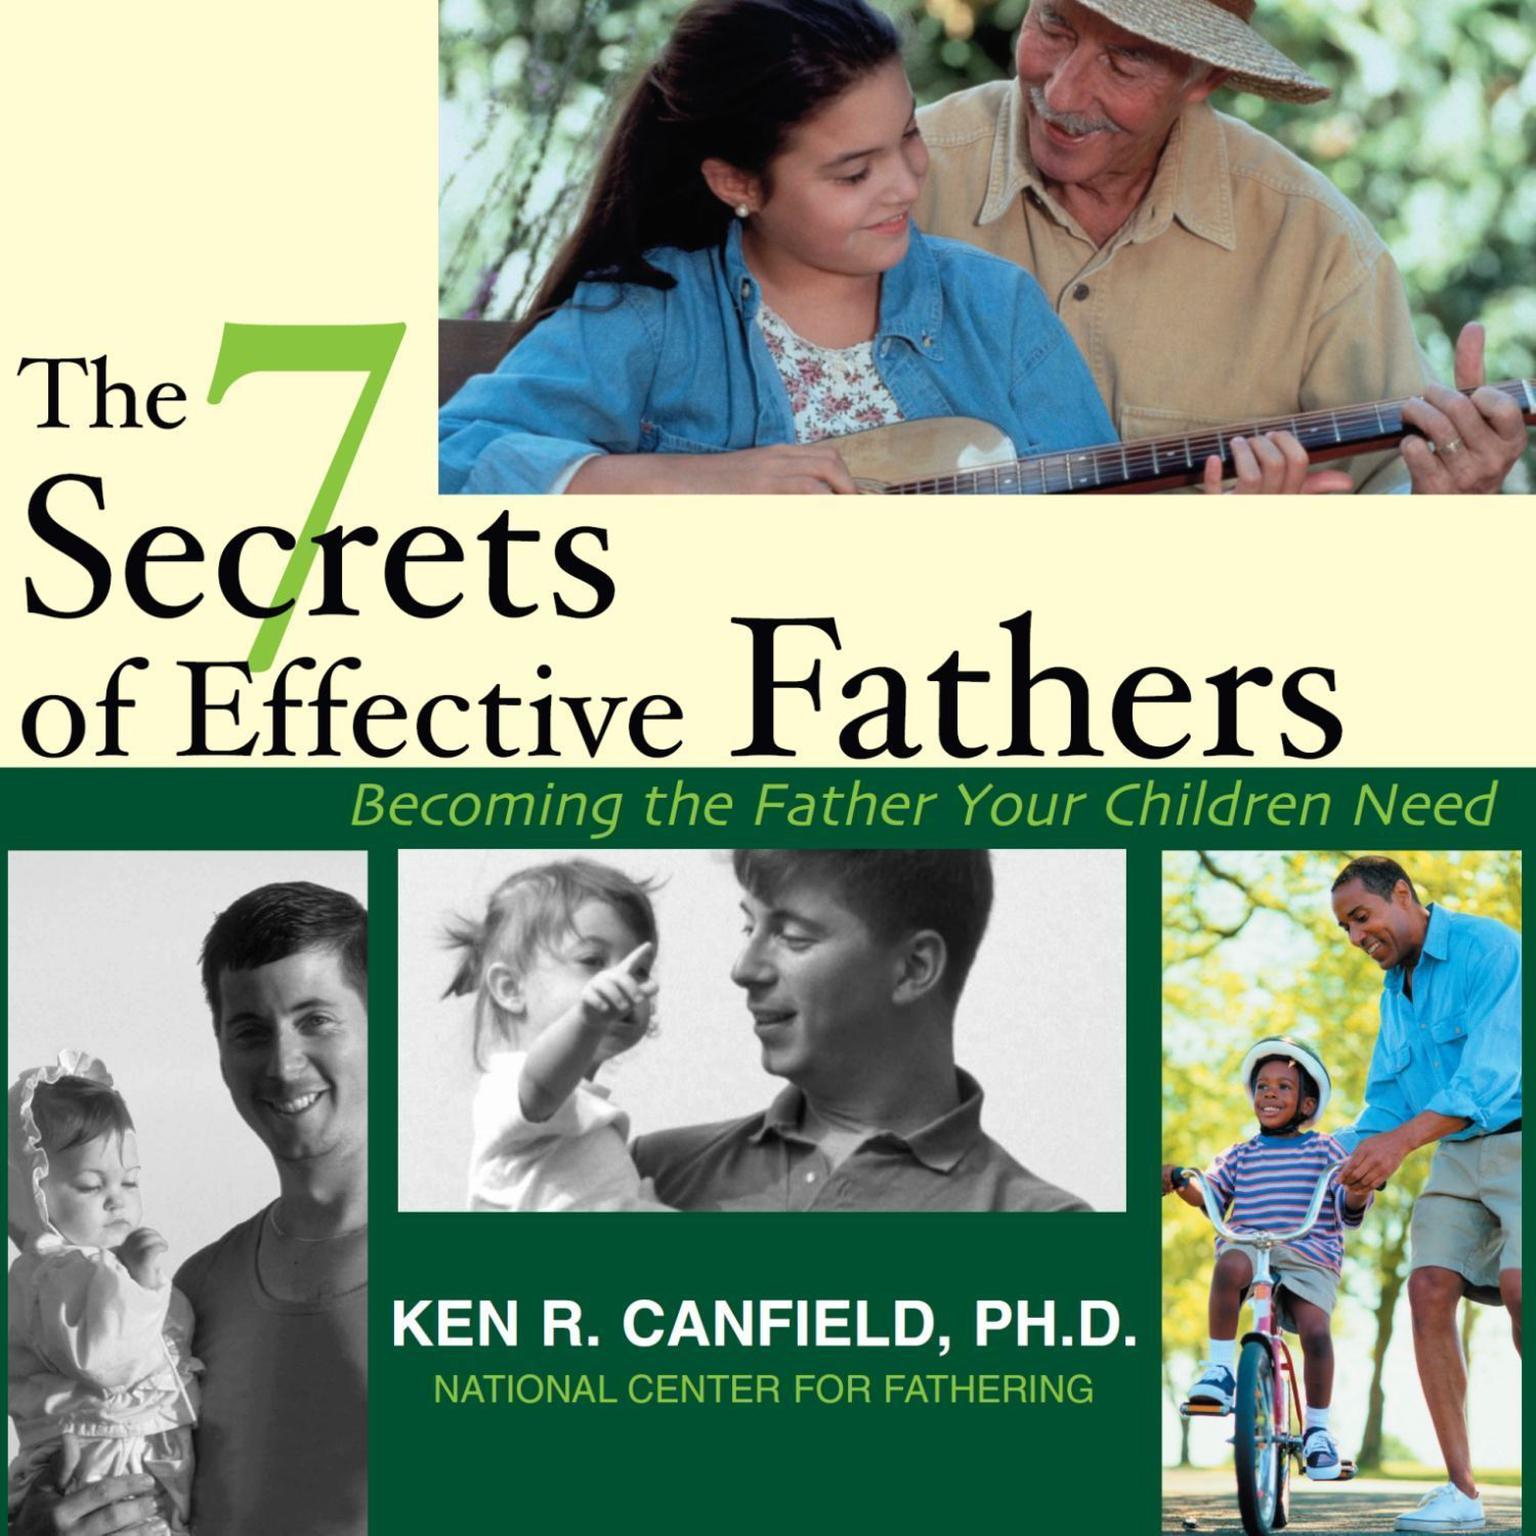 The 7 Secrets of Effective Fathers (Abridged): Becoming the Father Your Children Need Audiobook, by Ken Canfield